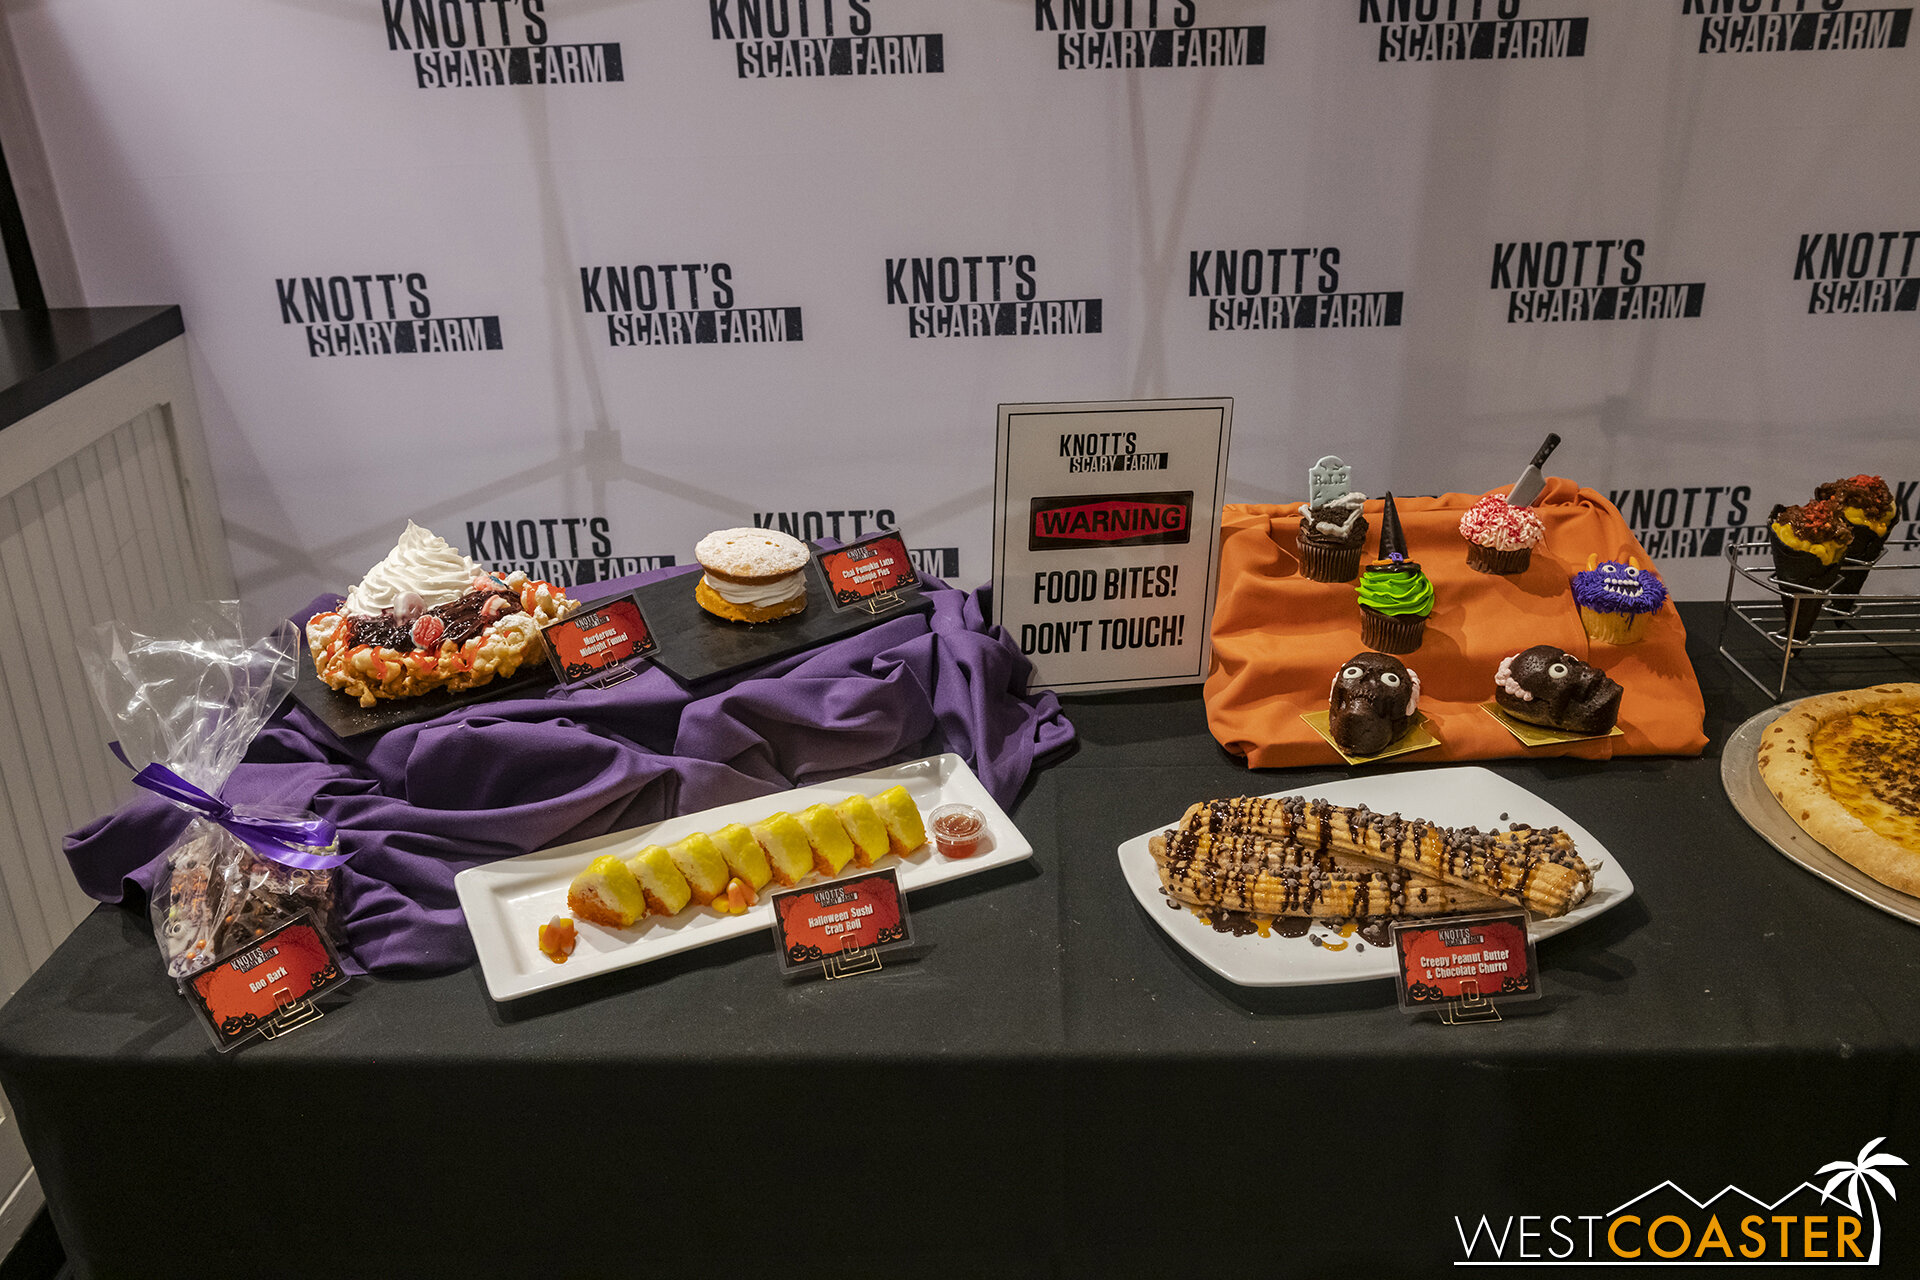  Here’s a look at the spread to be featured at Knott’s Scary Farm this year! 